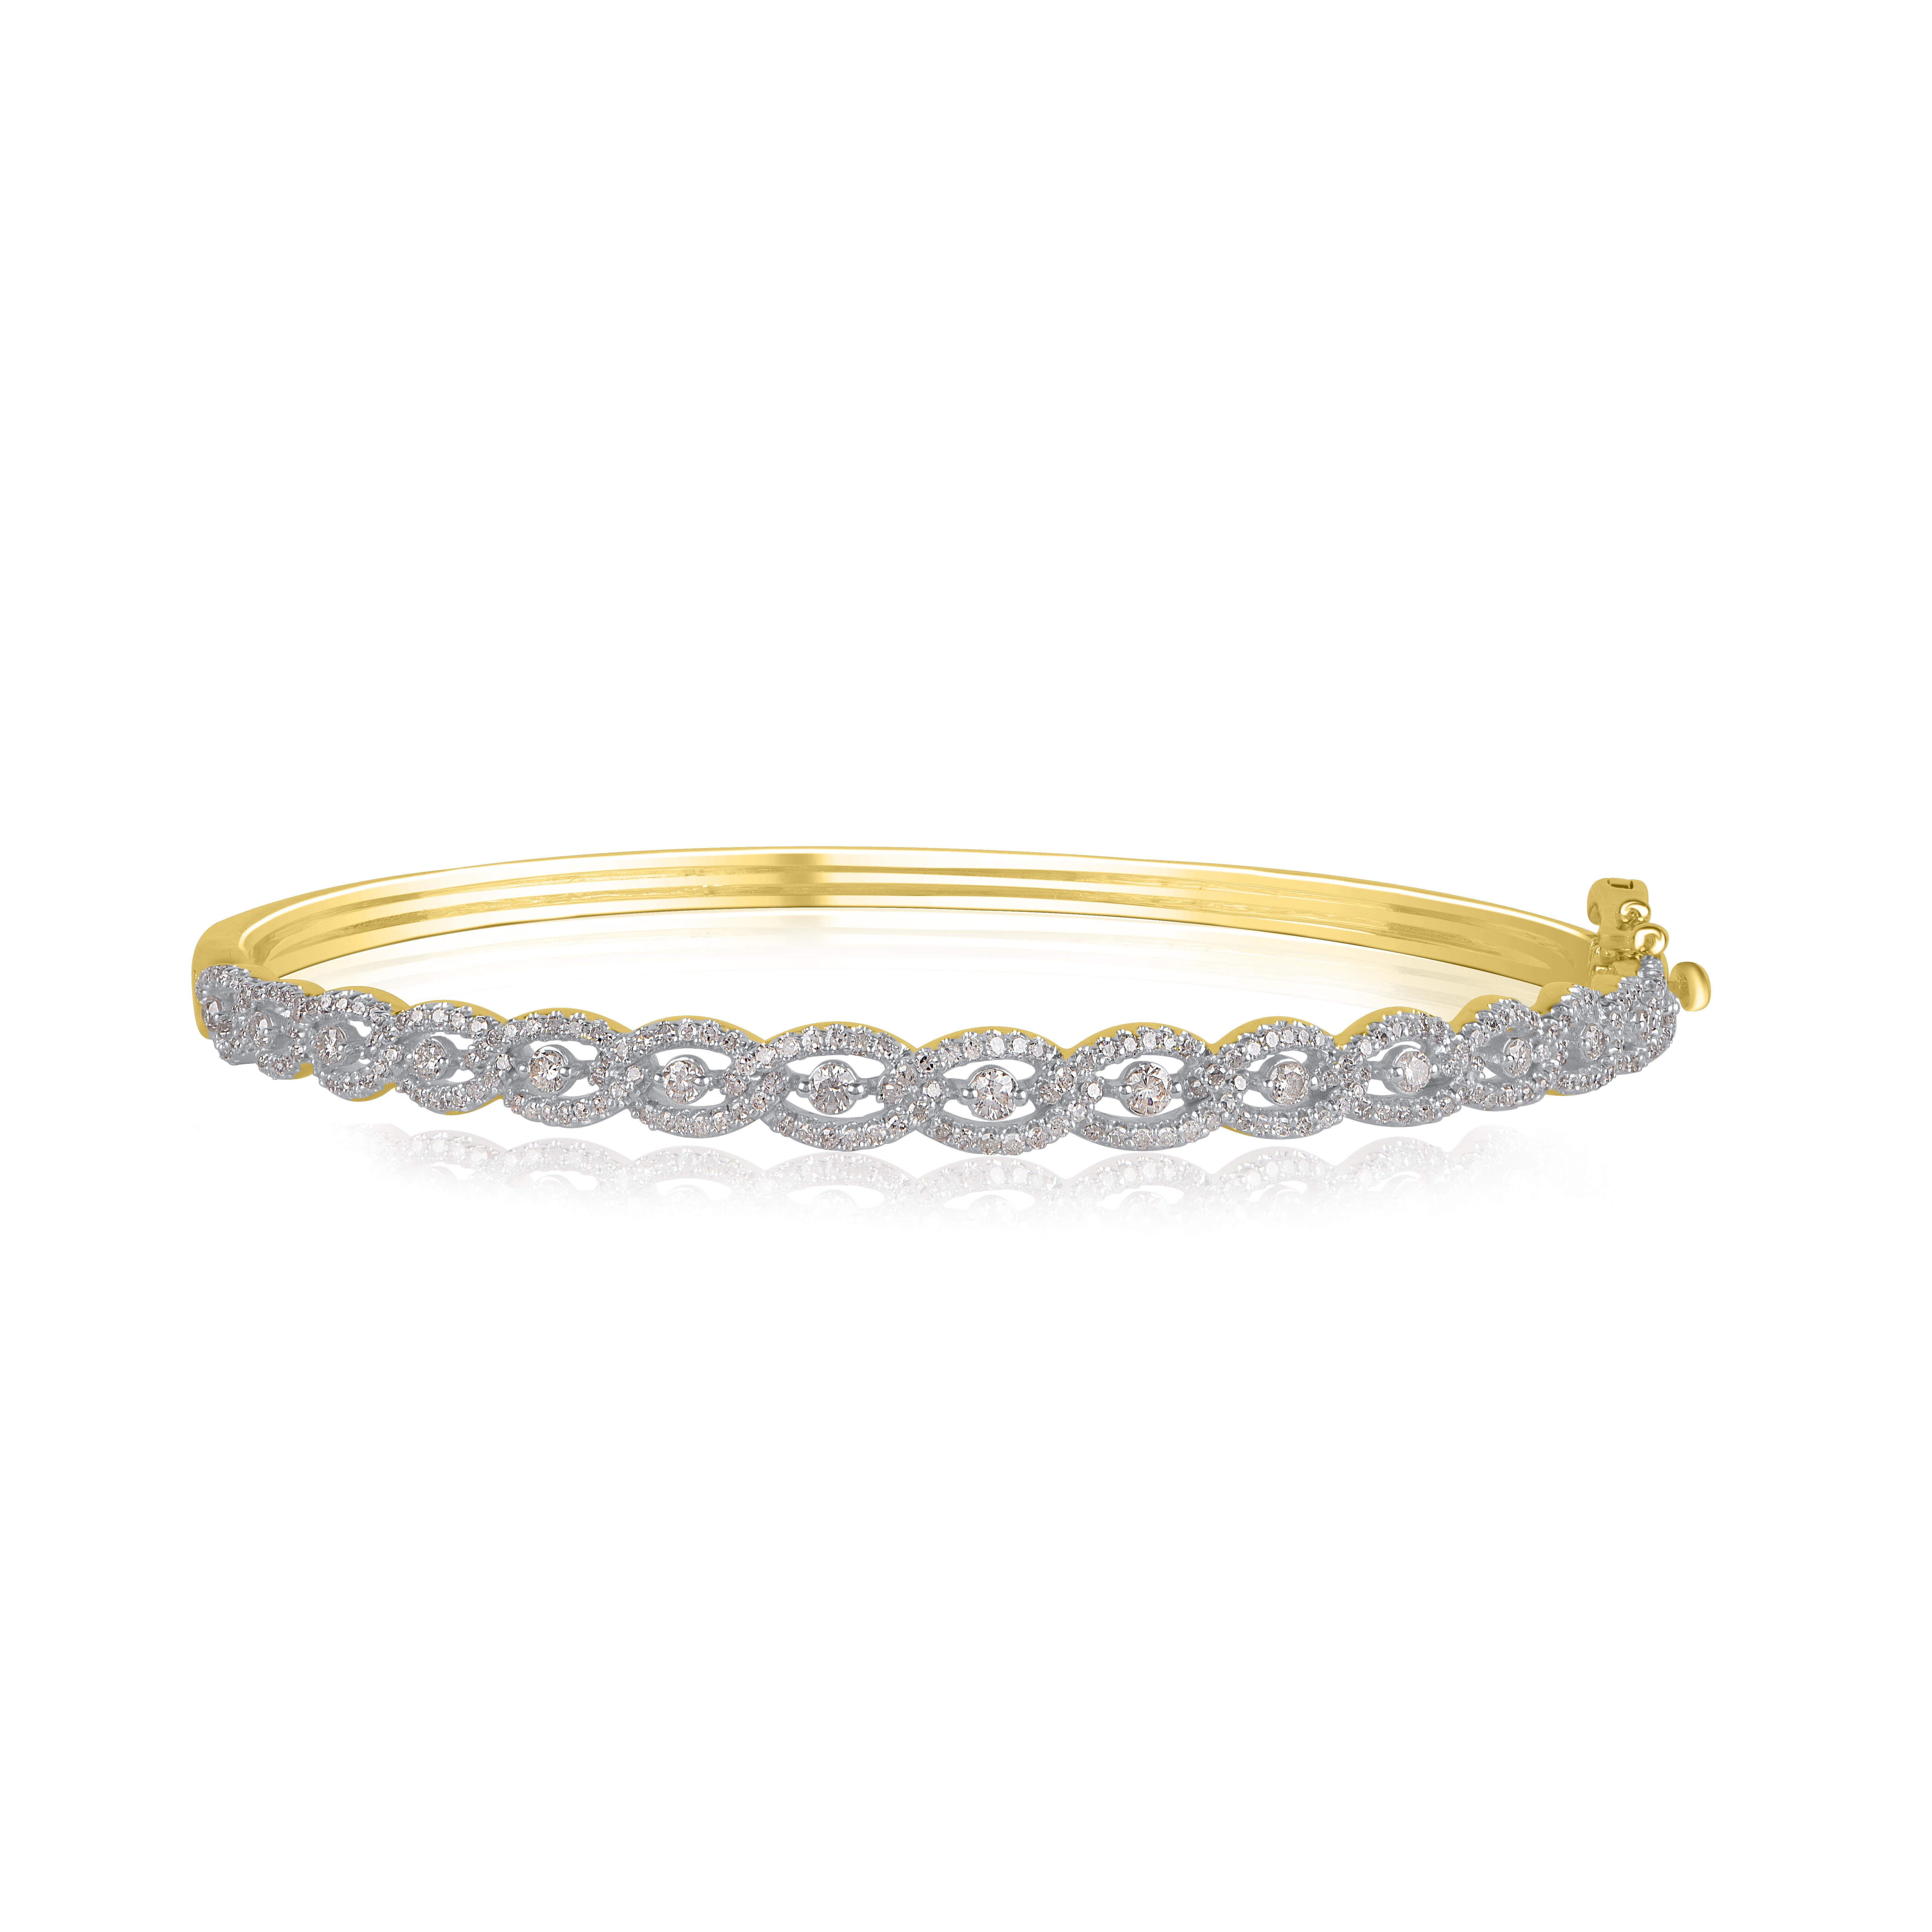 A classic look just for her, this diamond tennis bangle is certain to take her breath away. Dazzles with 253 round diamond set beautifully in prong setting and crafted by our experts in 14 karat yellow gold. The total weight of diamond is 1.00 Carat